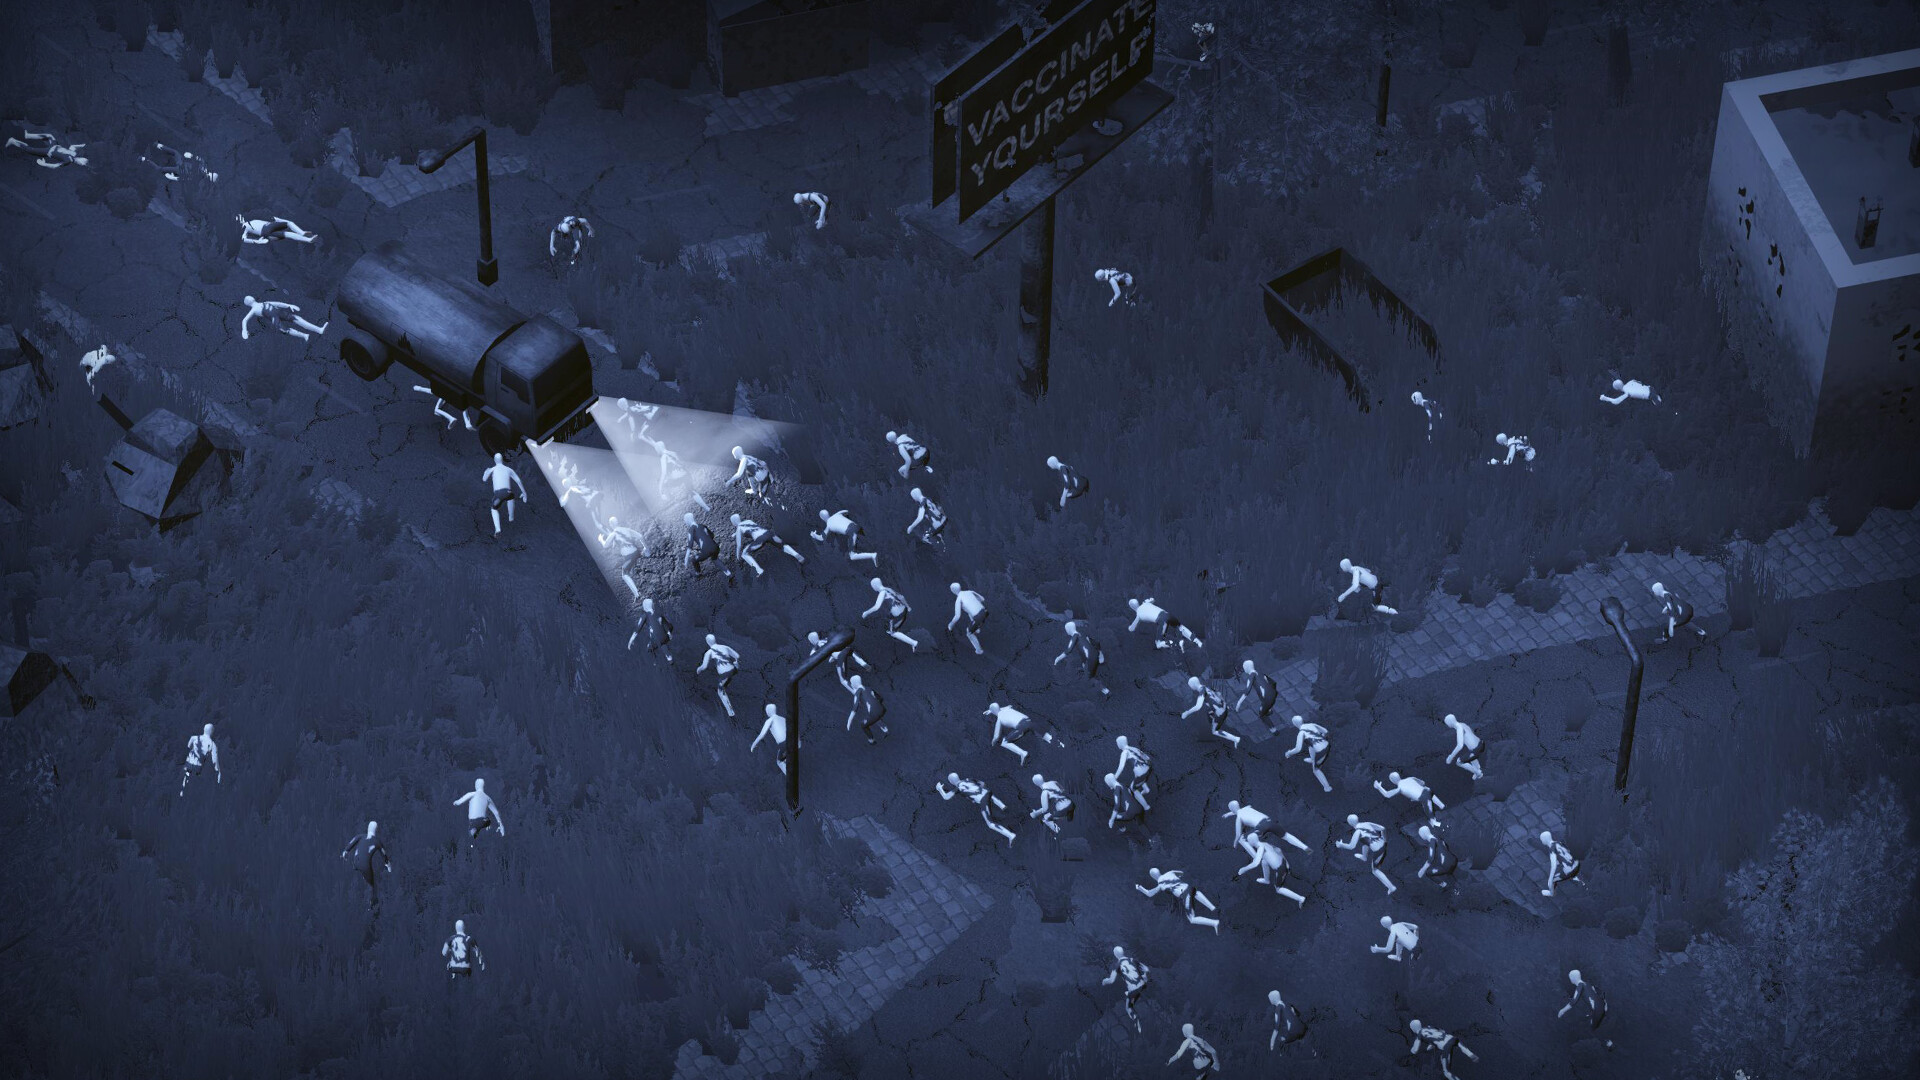  Infection Free Zone will let you reclaim your own town after the zombie apocalypse 